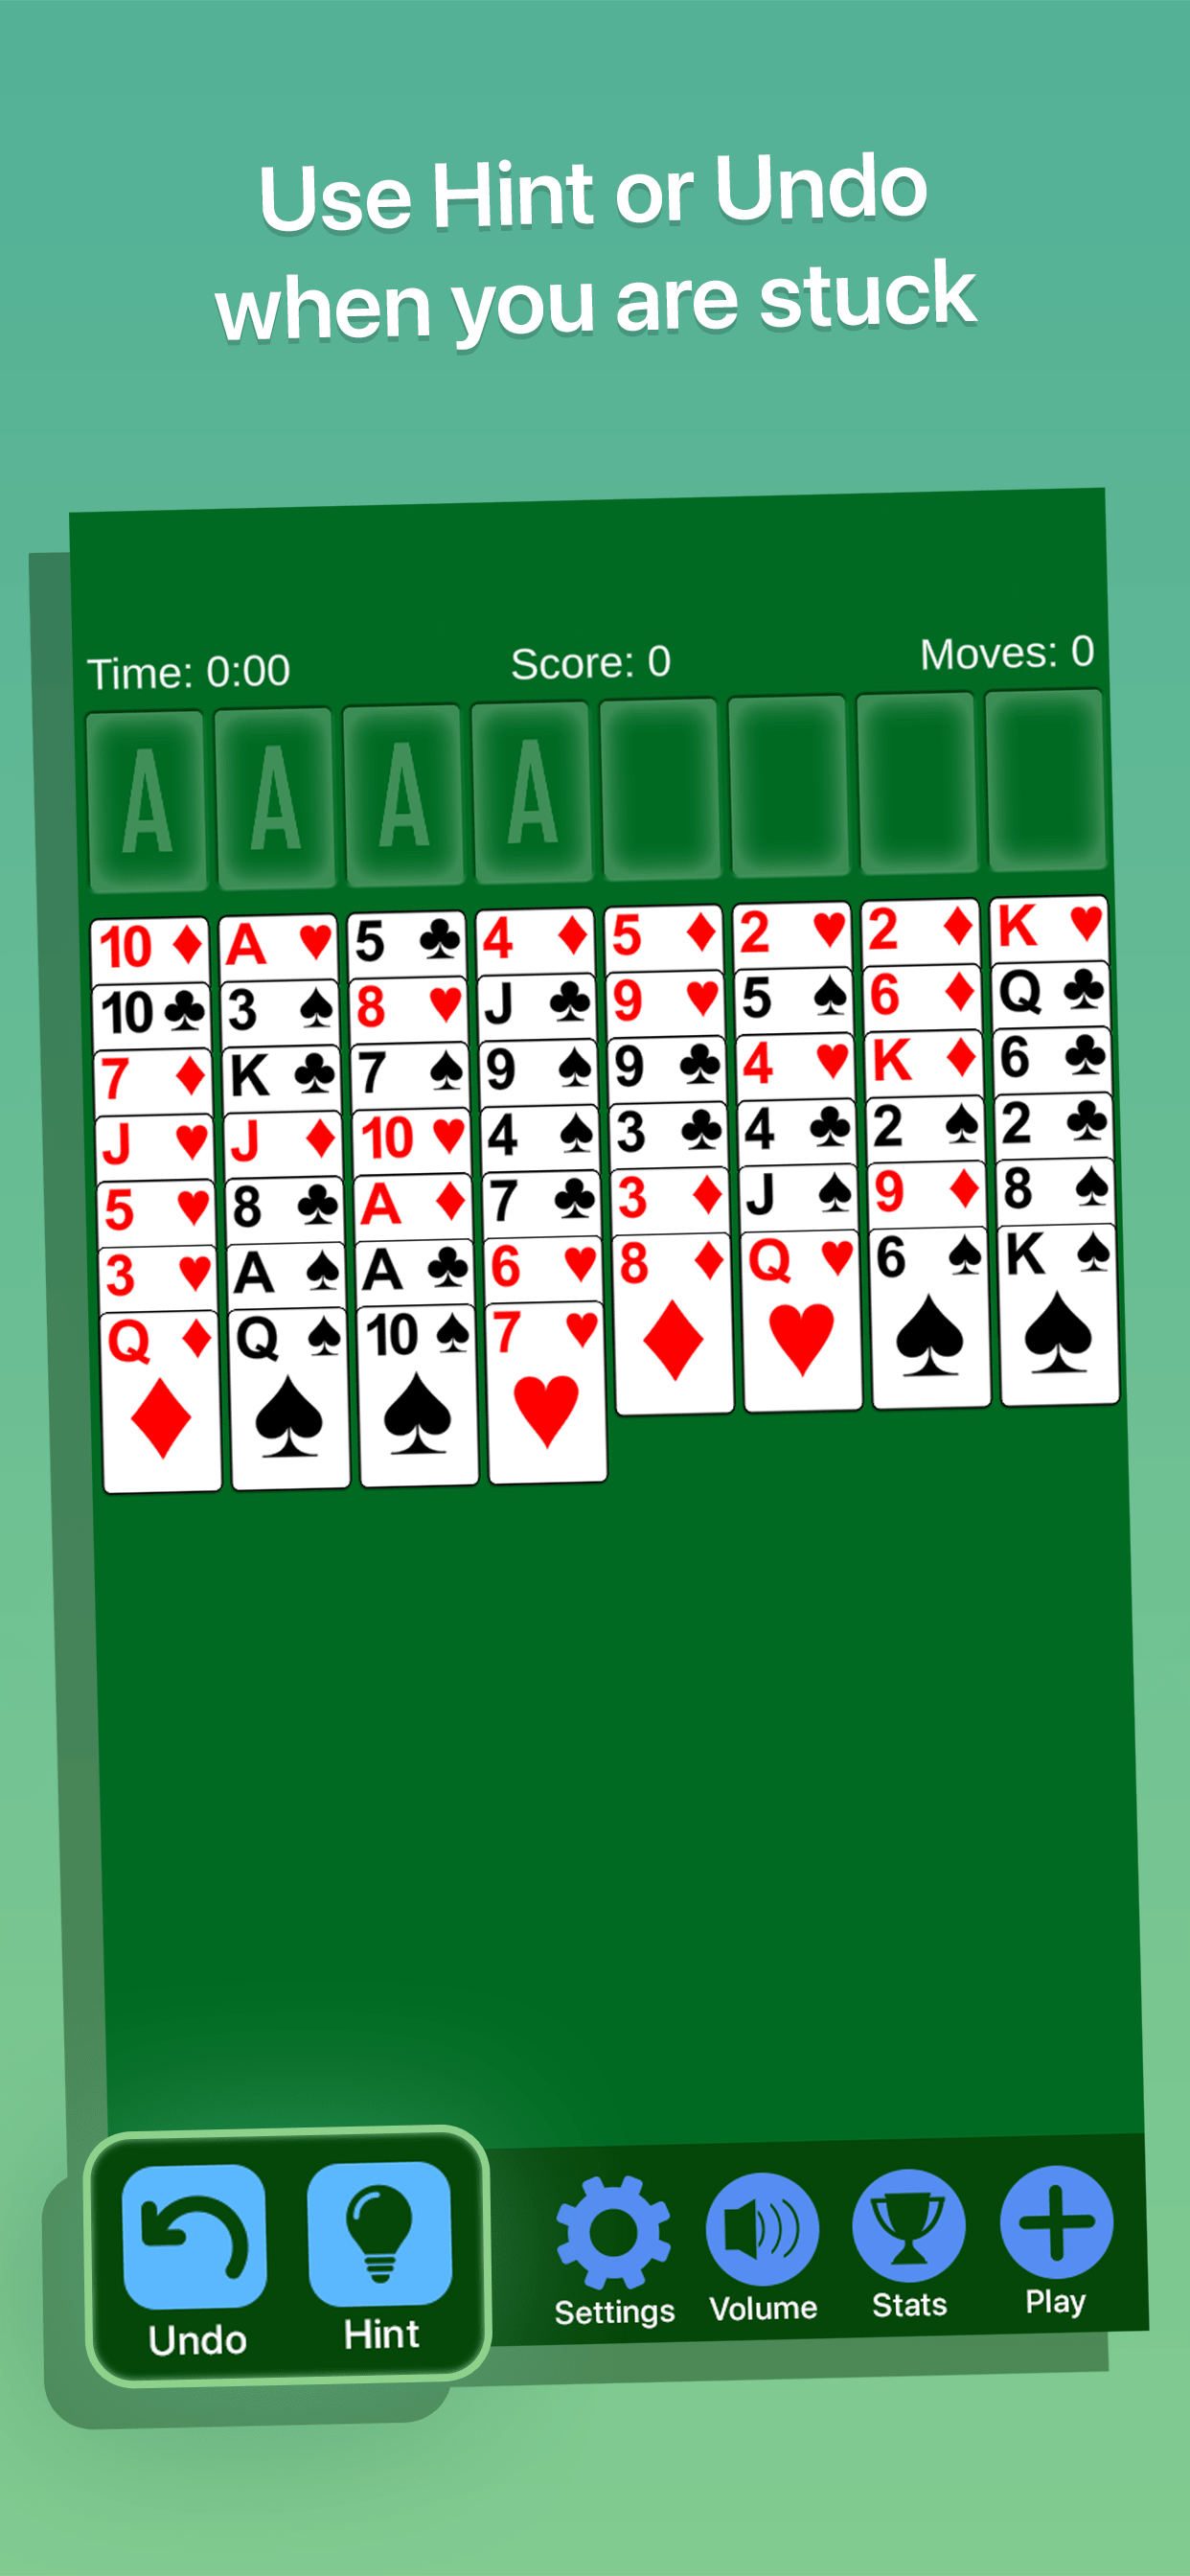 FreeCell Solitaire Game Screenshot